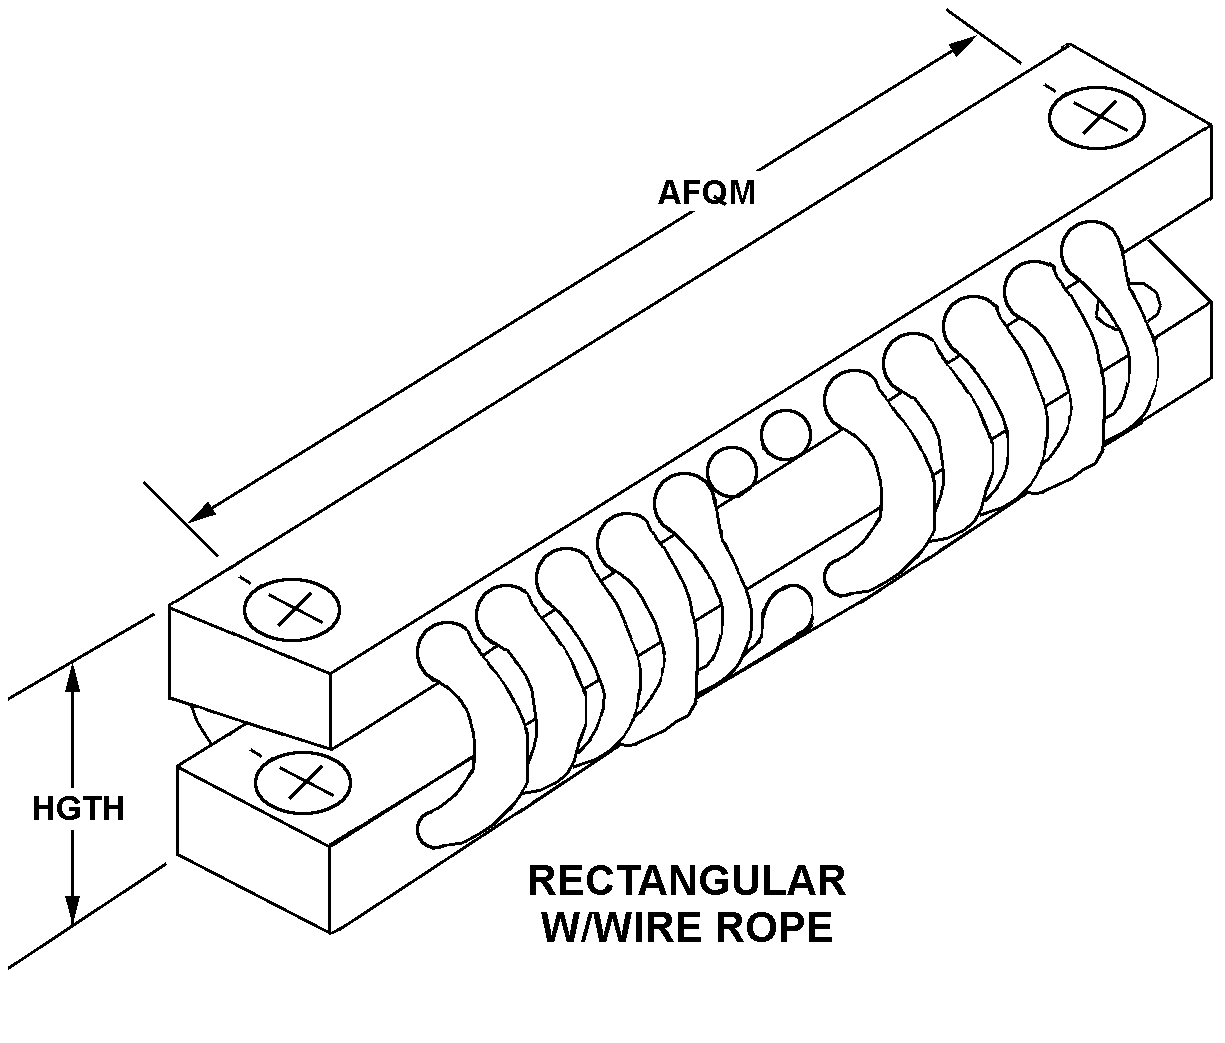 RECTANGULAR W/WIRE ROPE style nsn 5342-01-496-0783